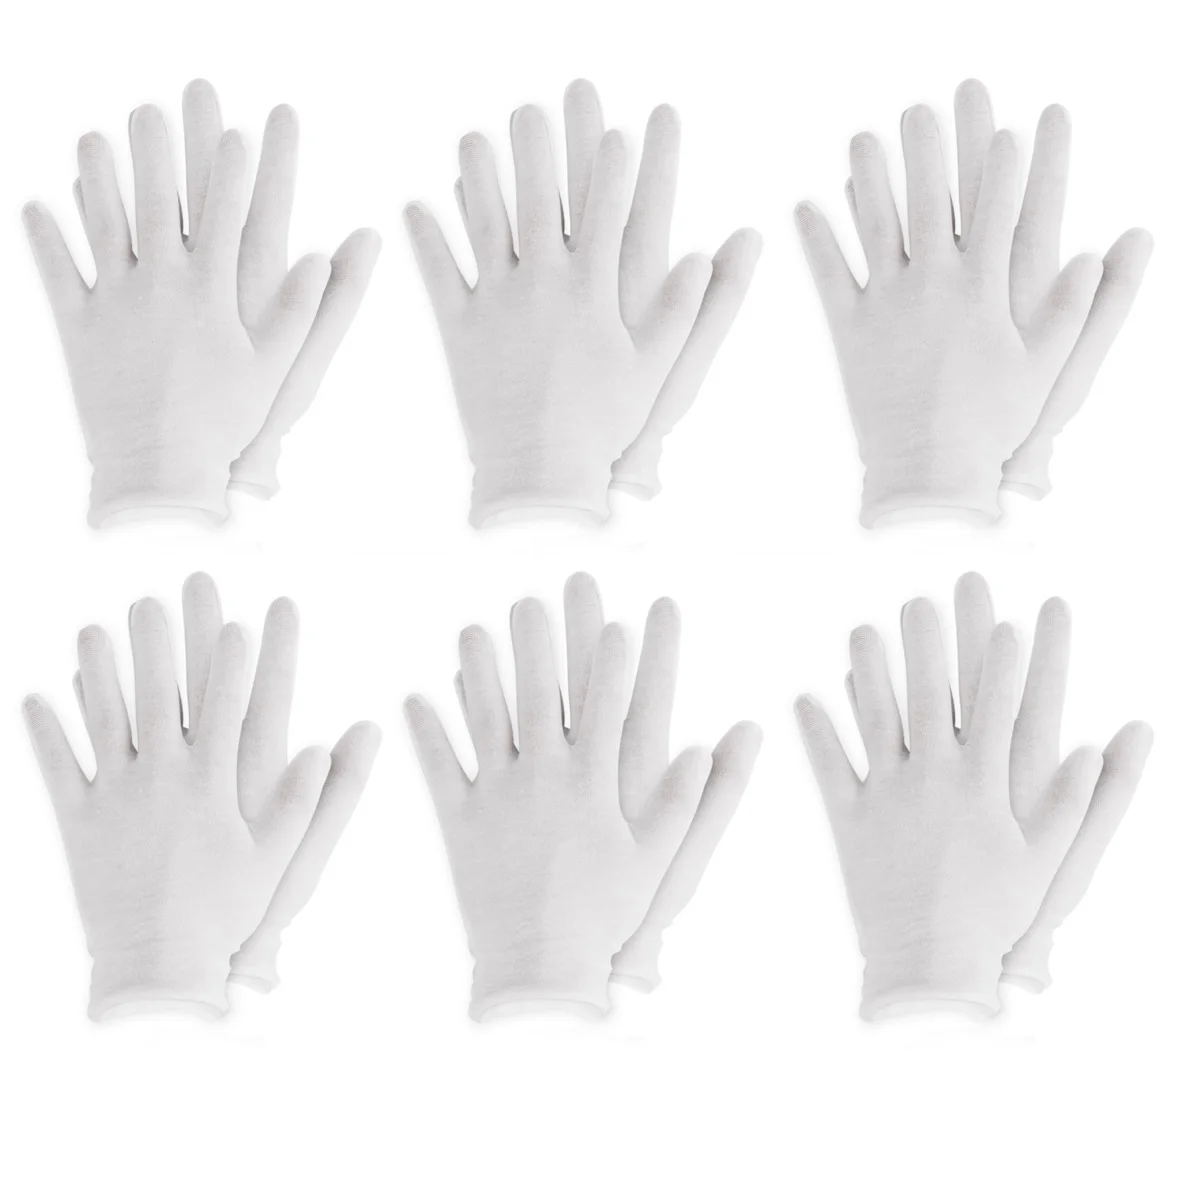 12 Pairs White Thin Reusable Elastic Soft Cotton Gloves Dry Hands Moisturizing Cosmetic Hand Spa Coin Jewelry Inspection Glove 